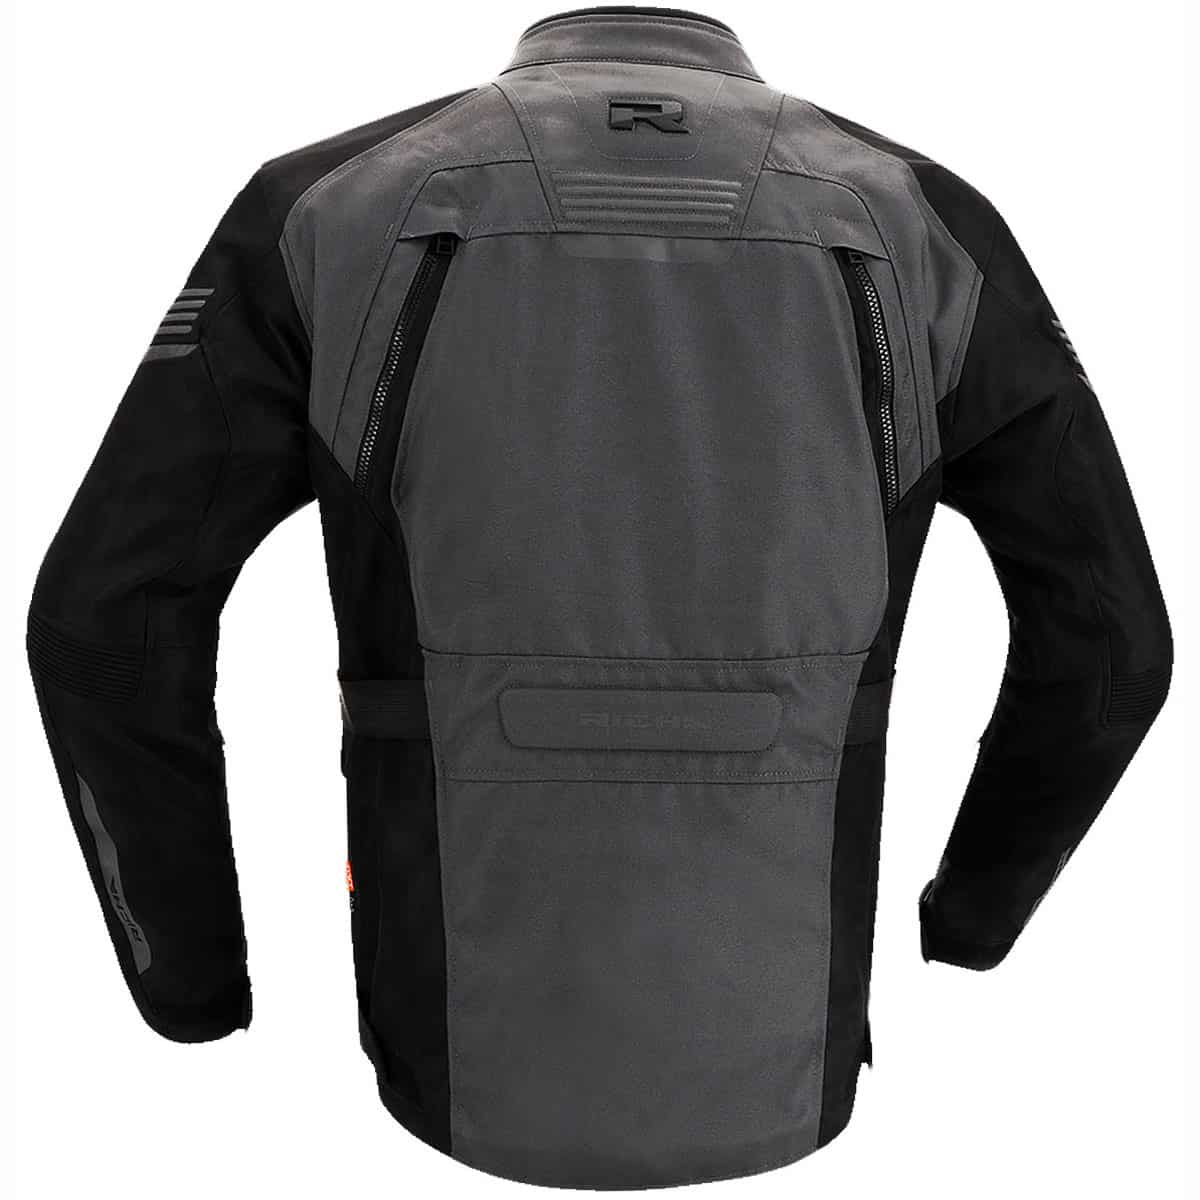 Waterproof textile motorcycle jacket with D3O armour &amp; AA CE-rating - back